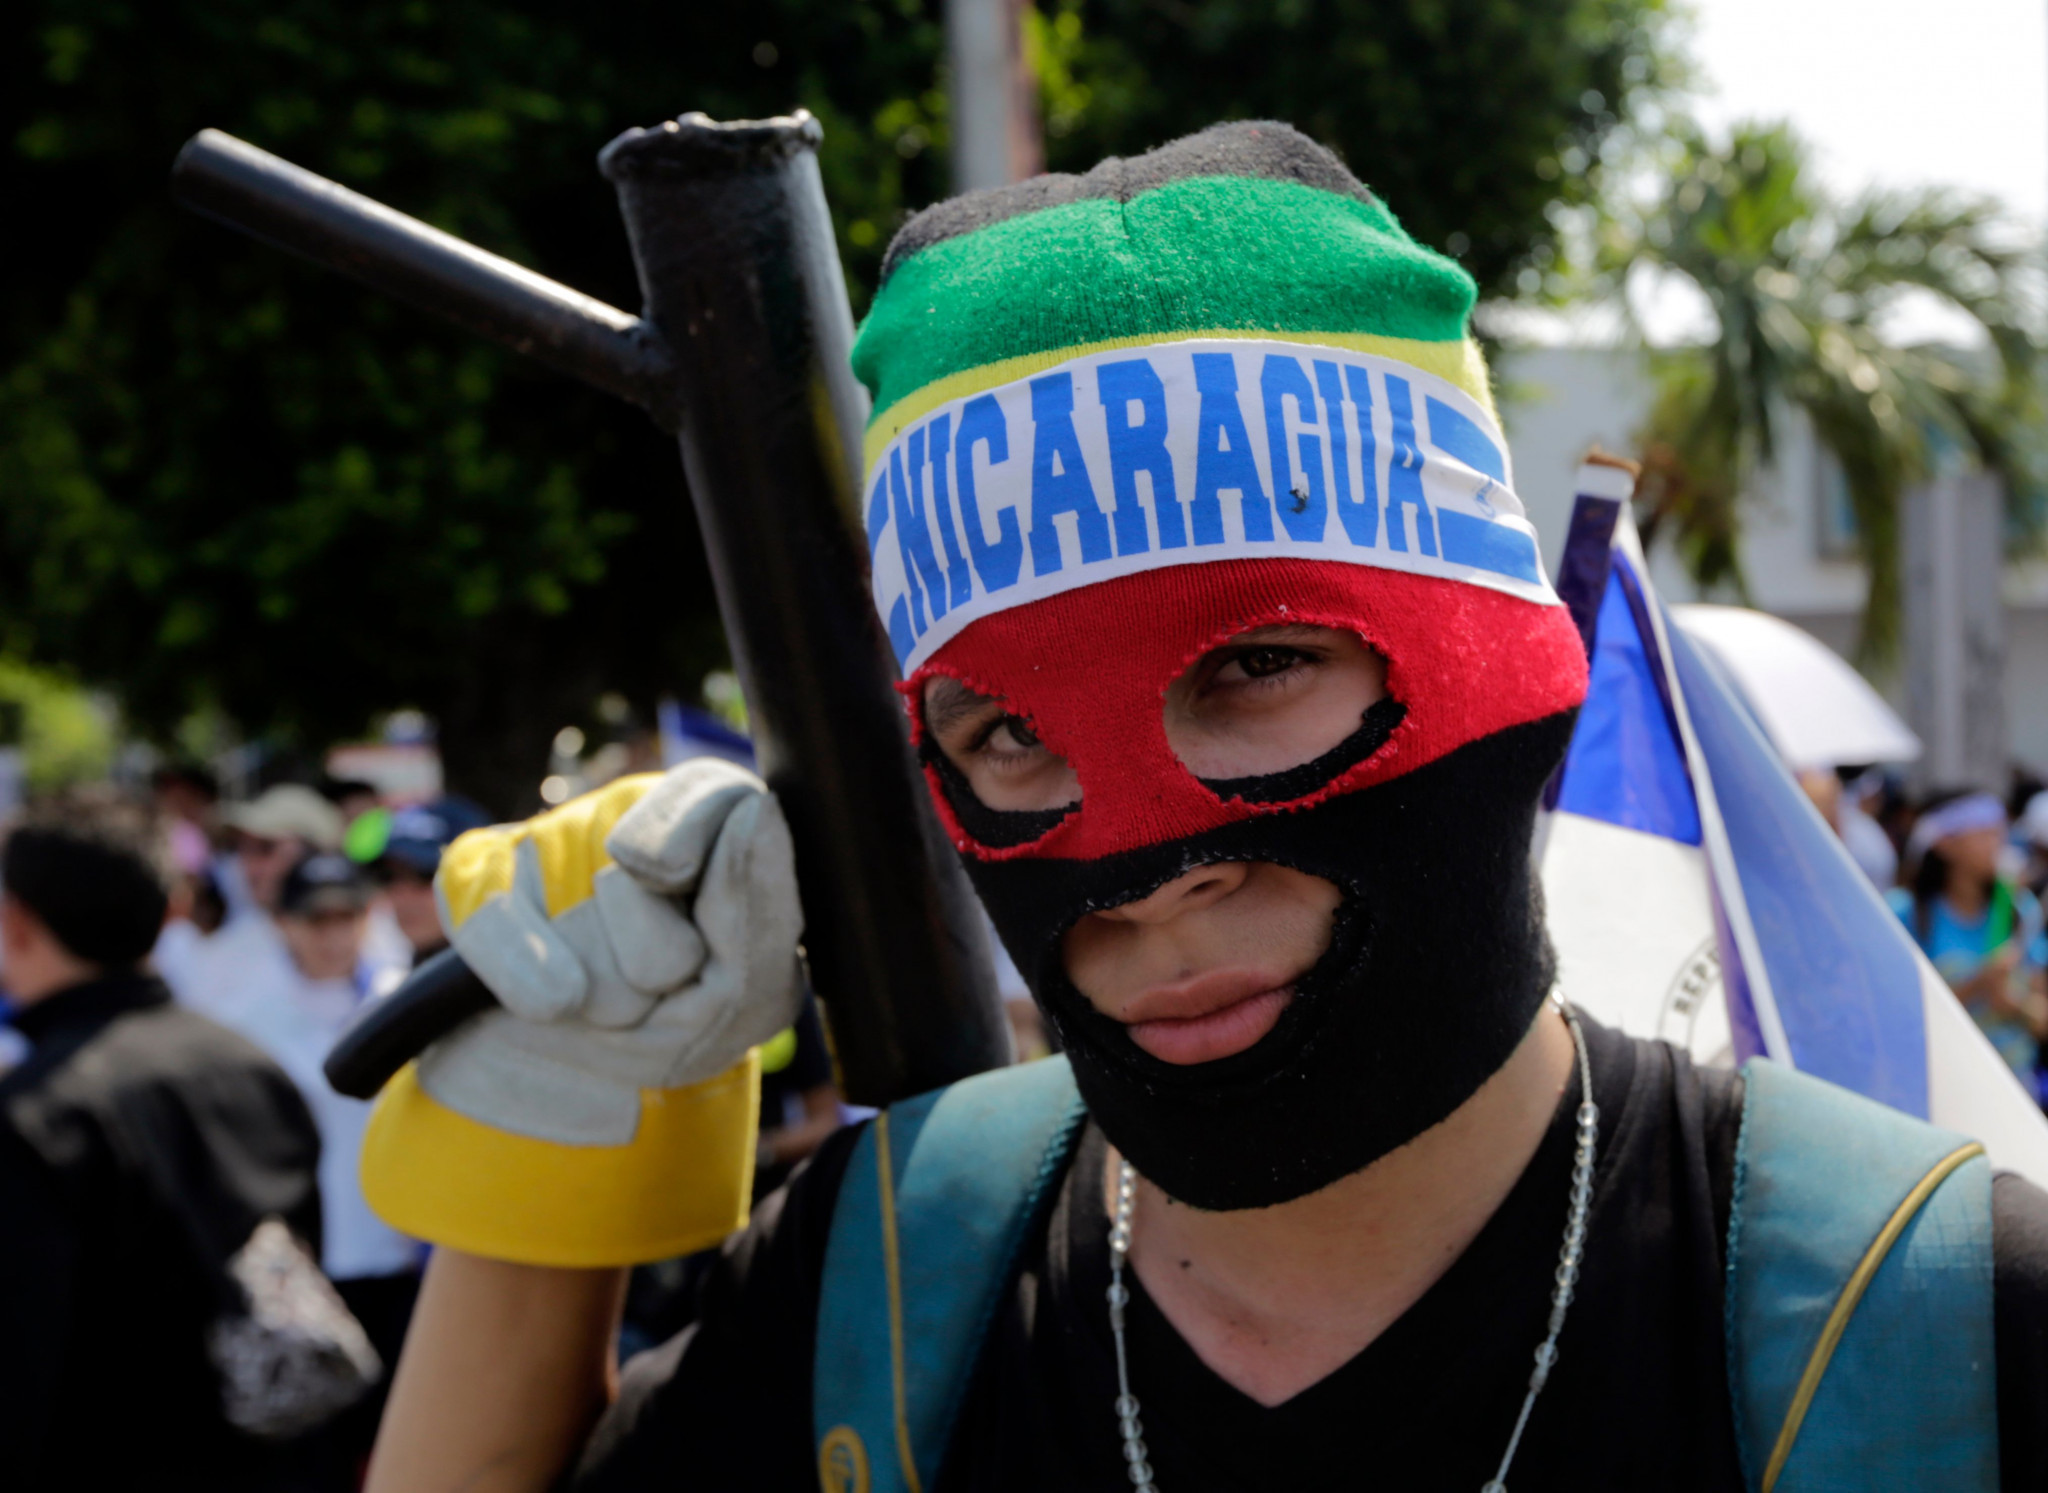 The tournament was taking place in Nicaragua but was suspended when violent protests broke out in the country ©Getty Images